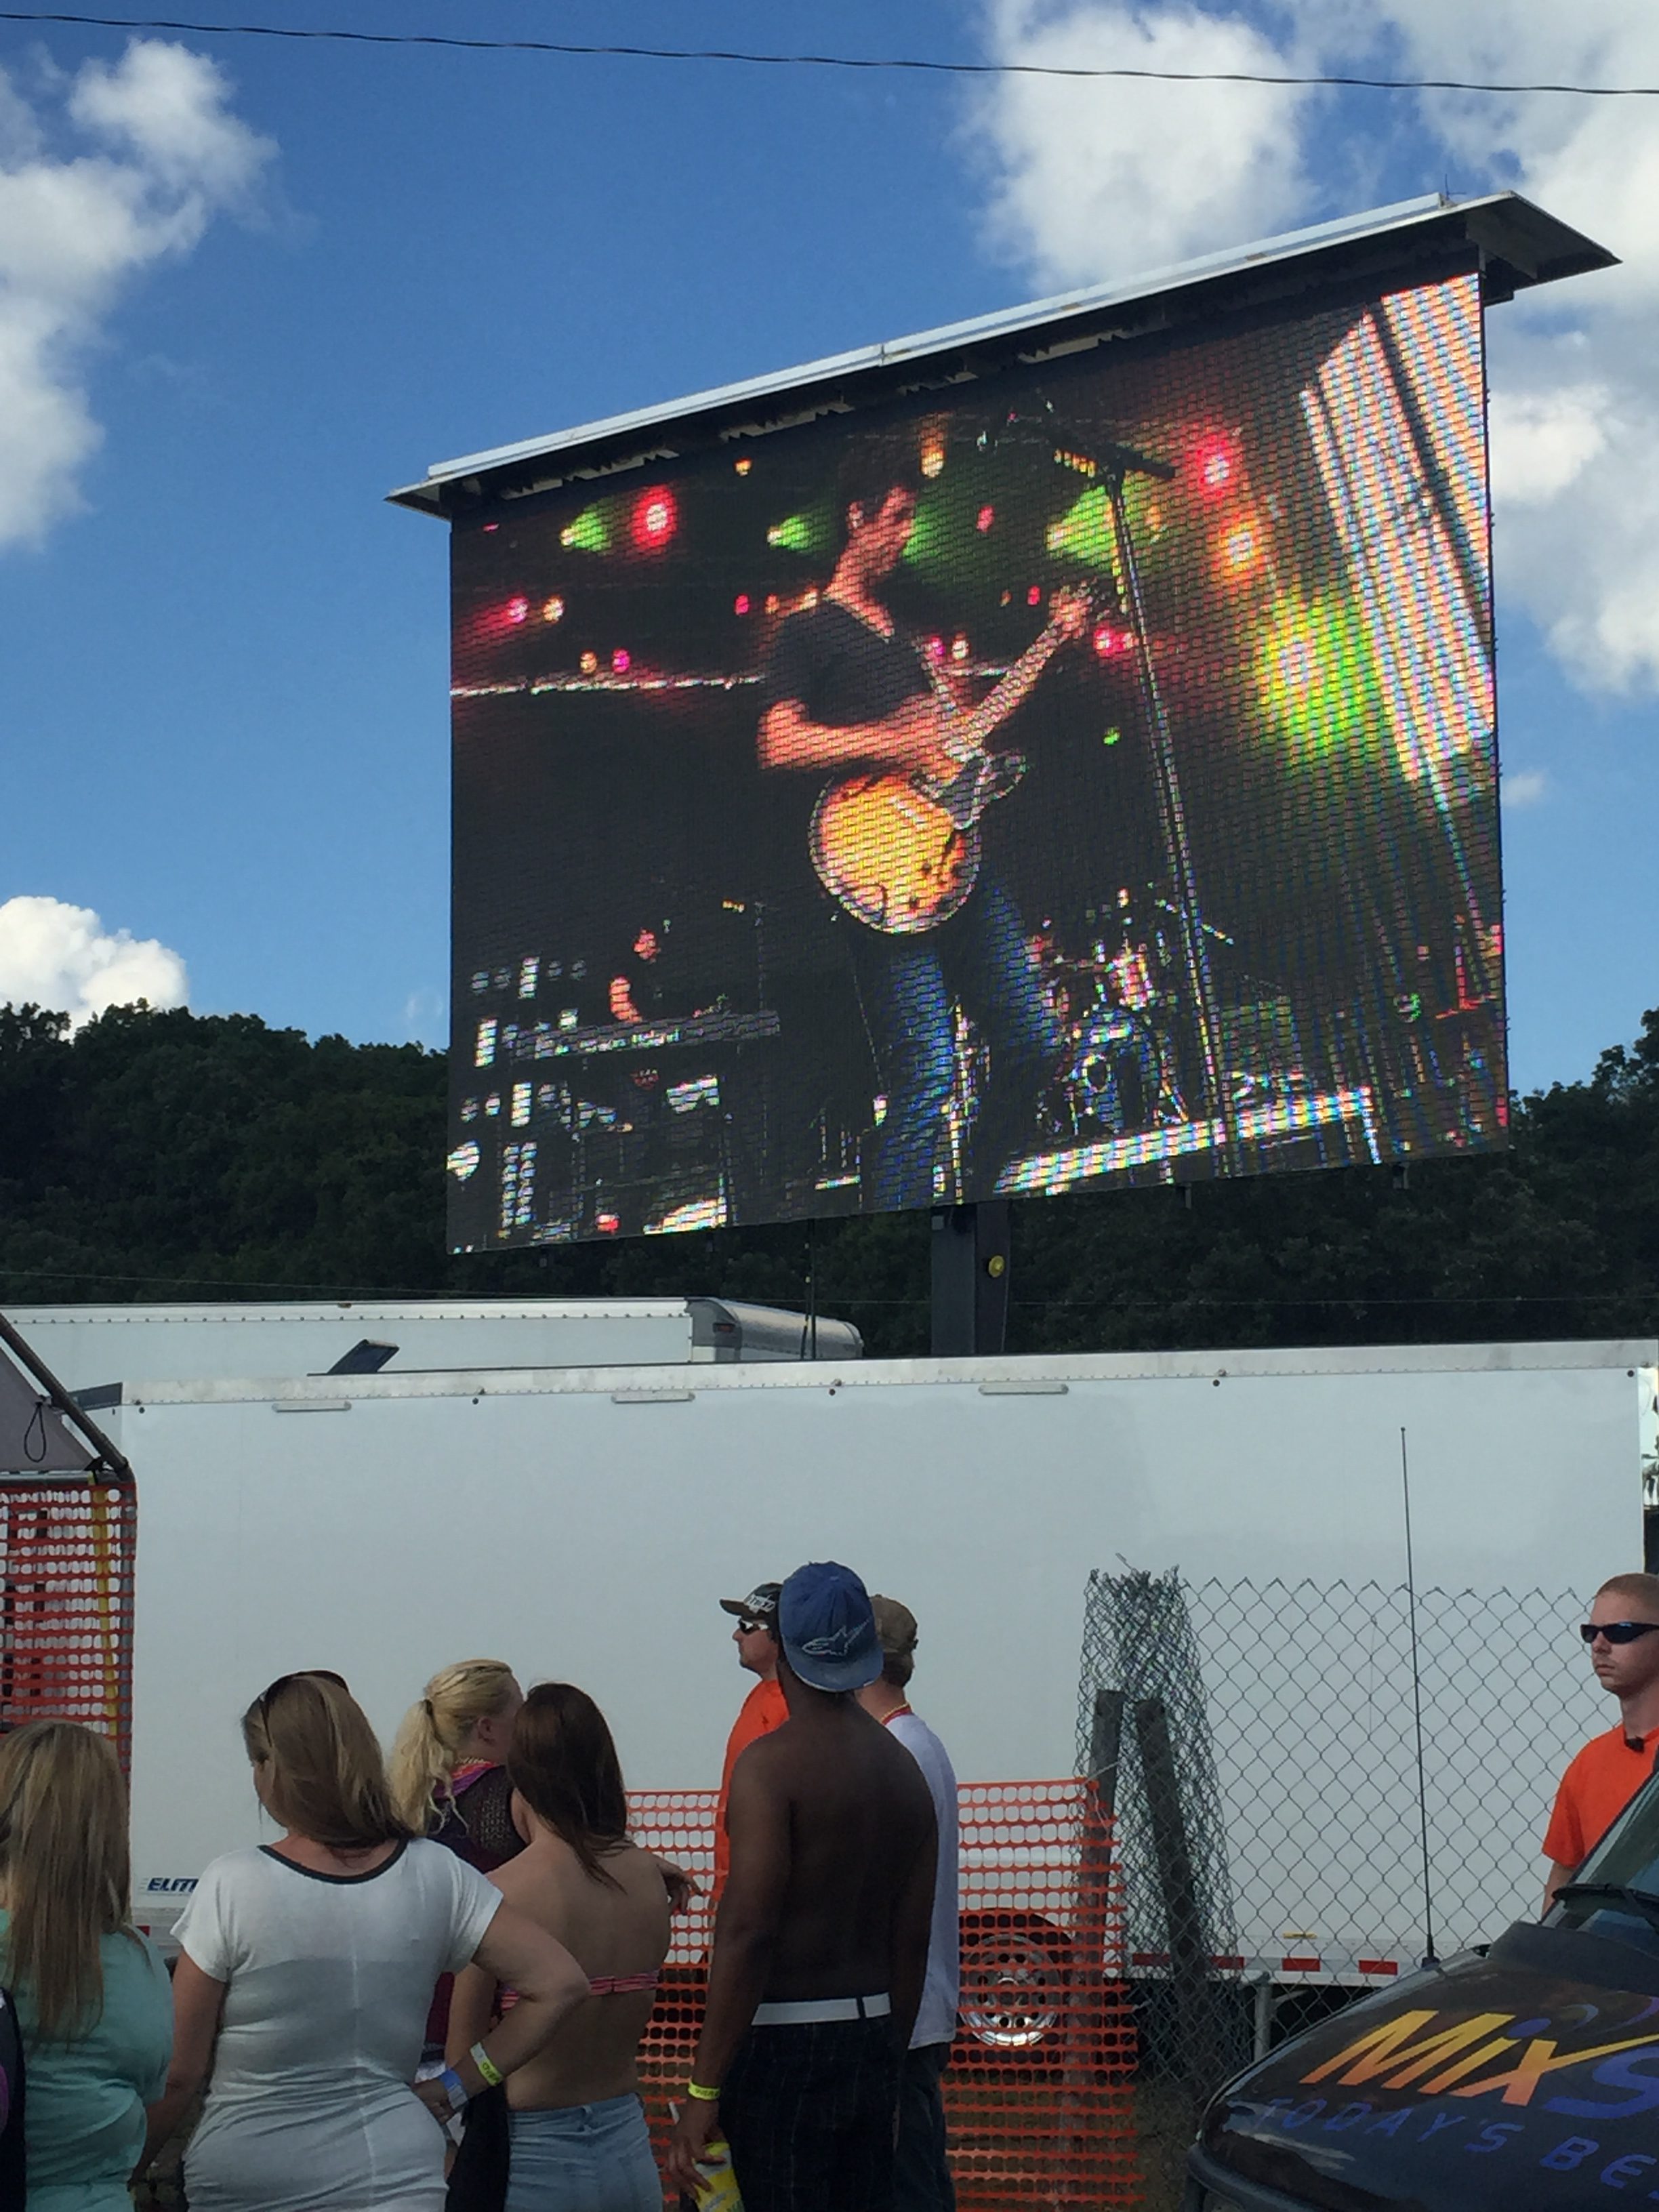 led mobile jumbotron big screen tv for outdoor events in bloomington minnesota